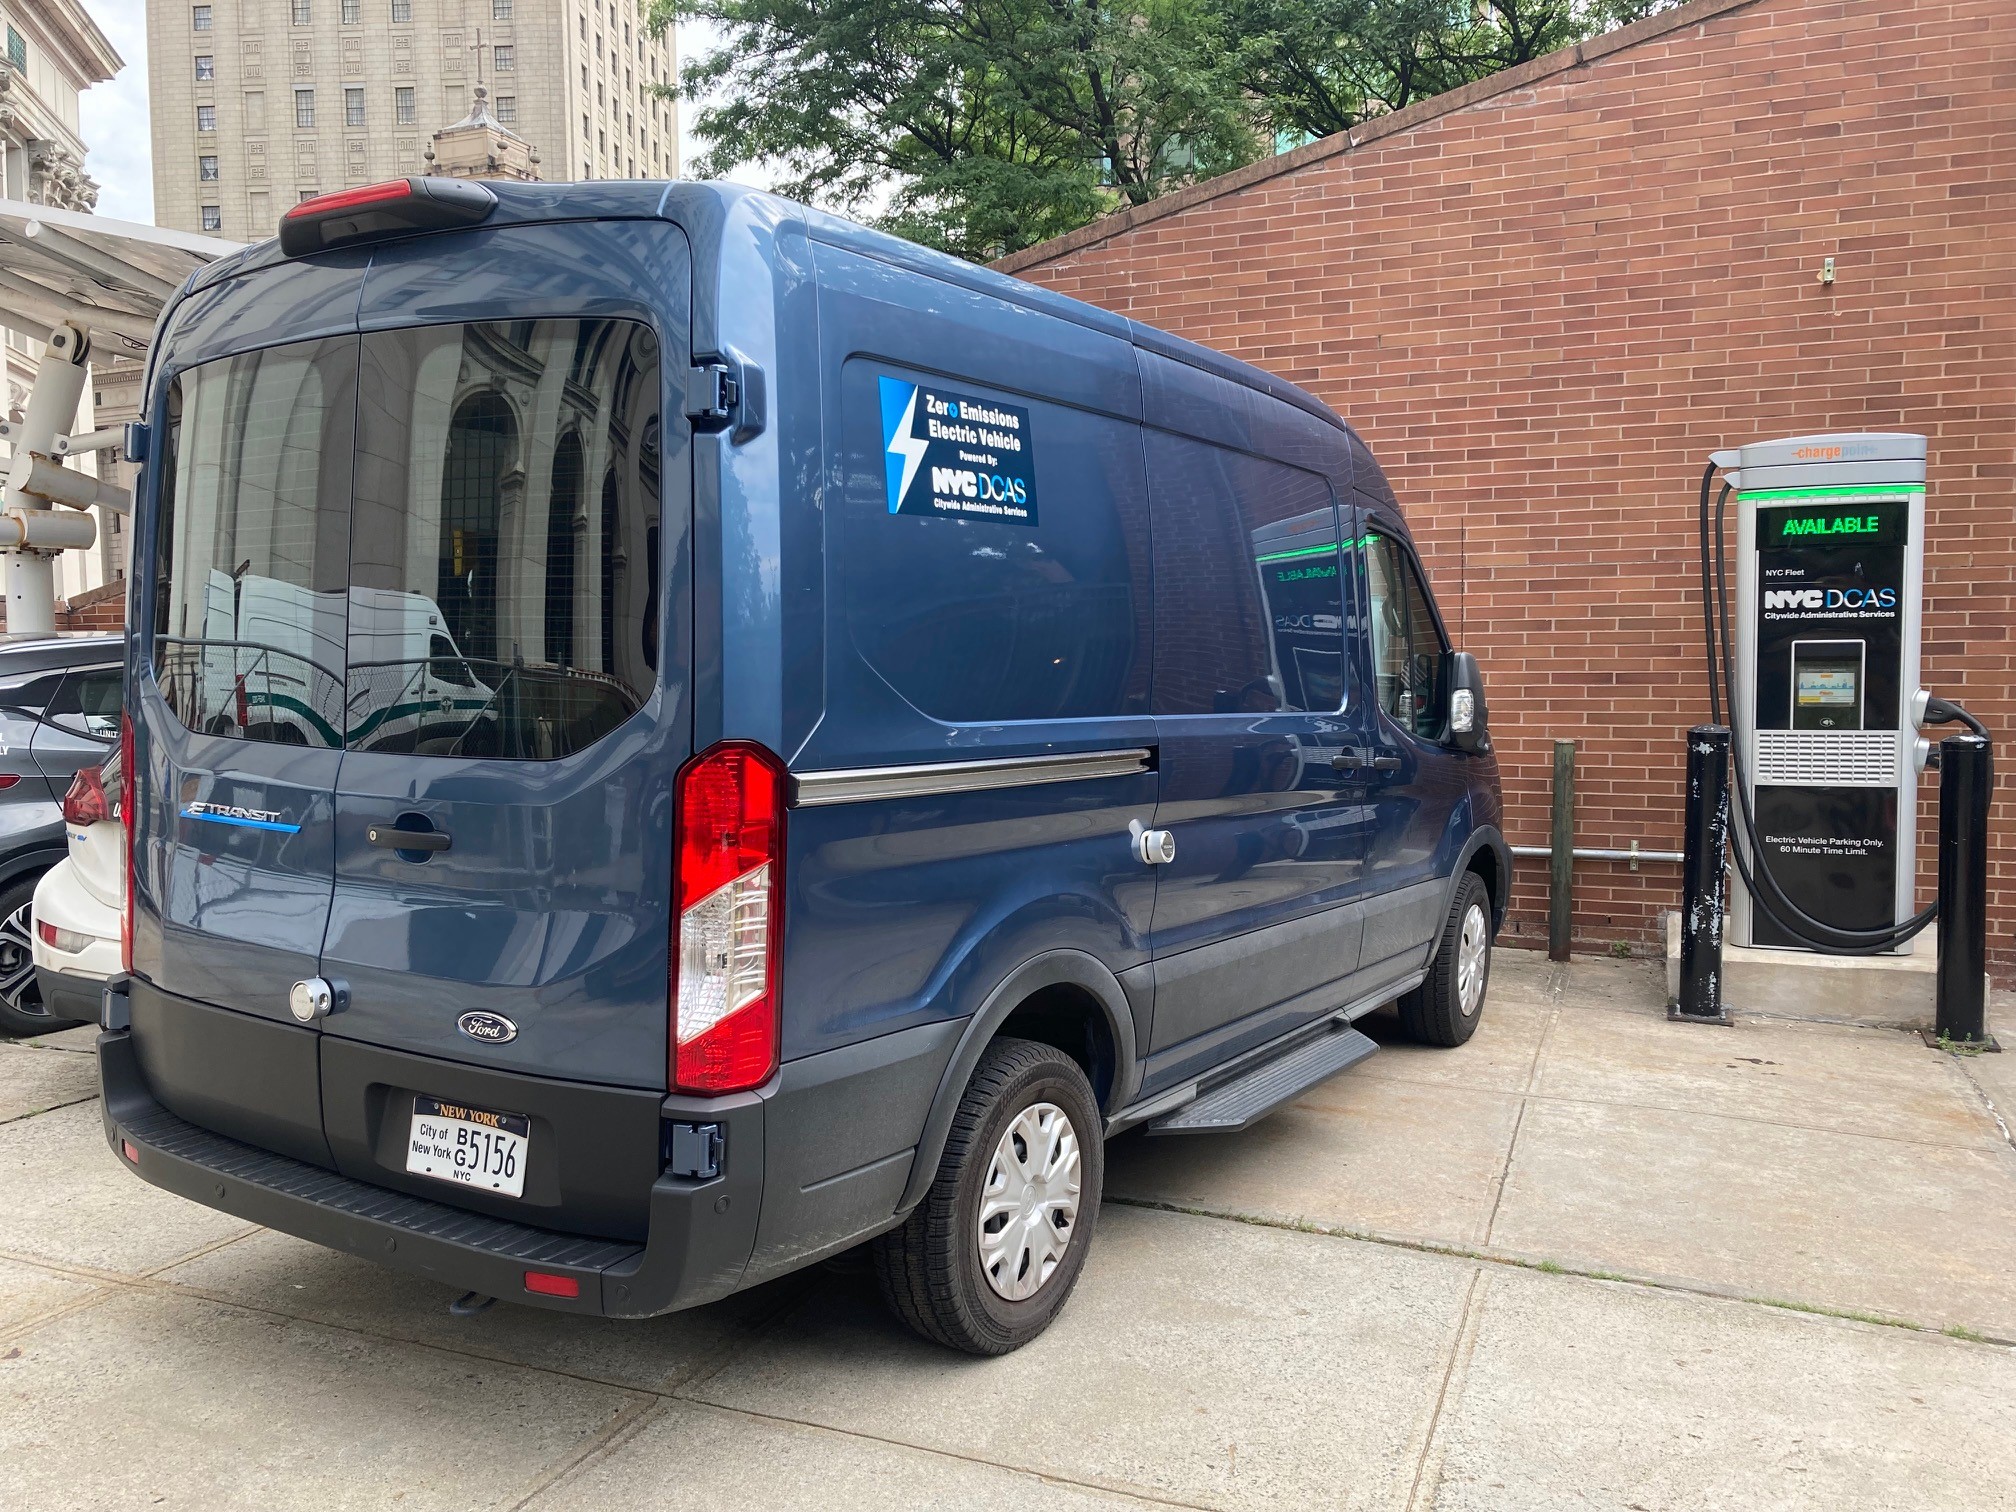 DCAS Rolls Out Over 300 Electric Vans
                                           